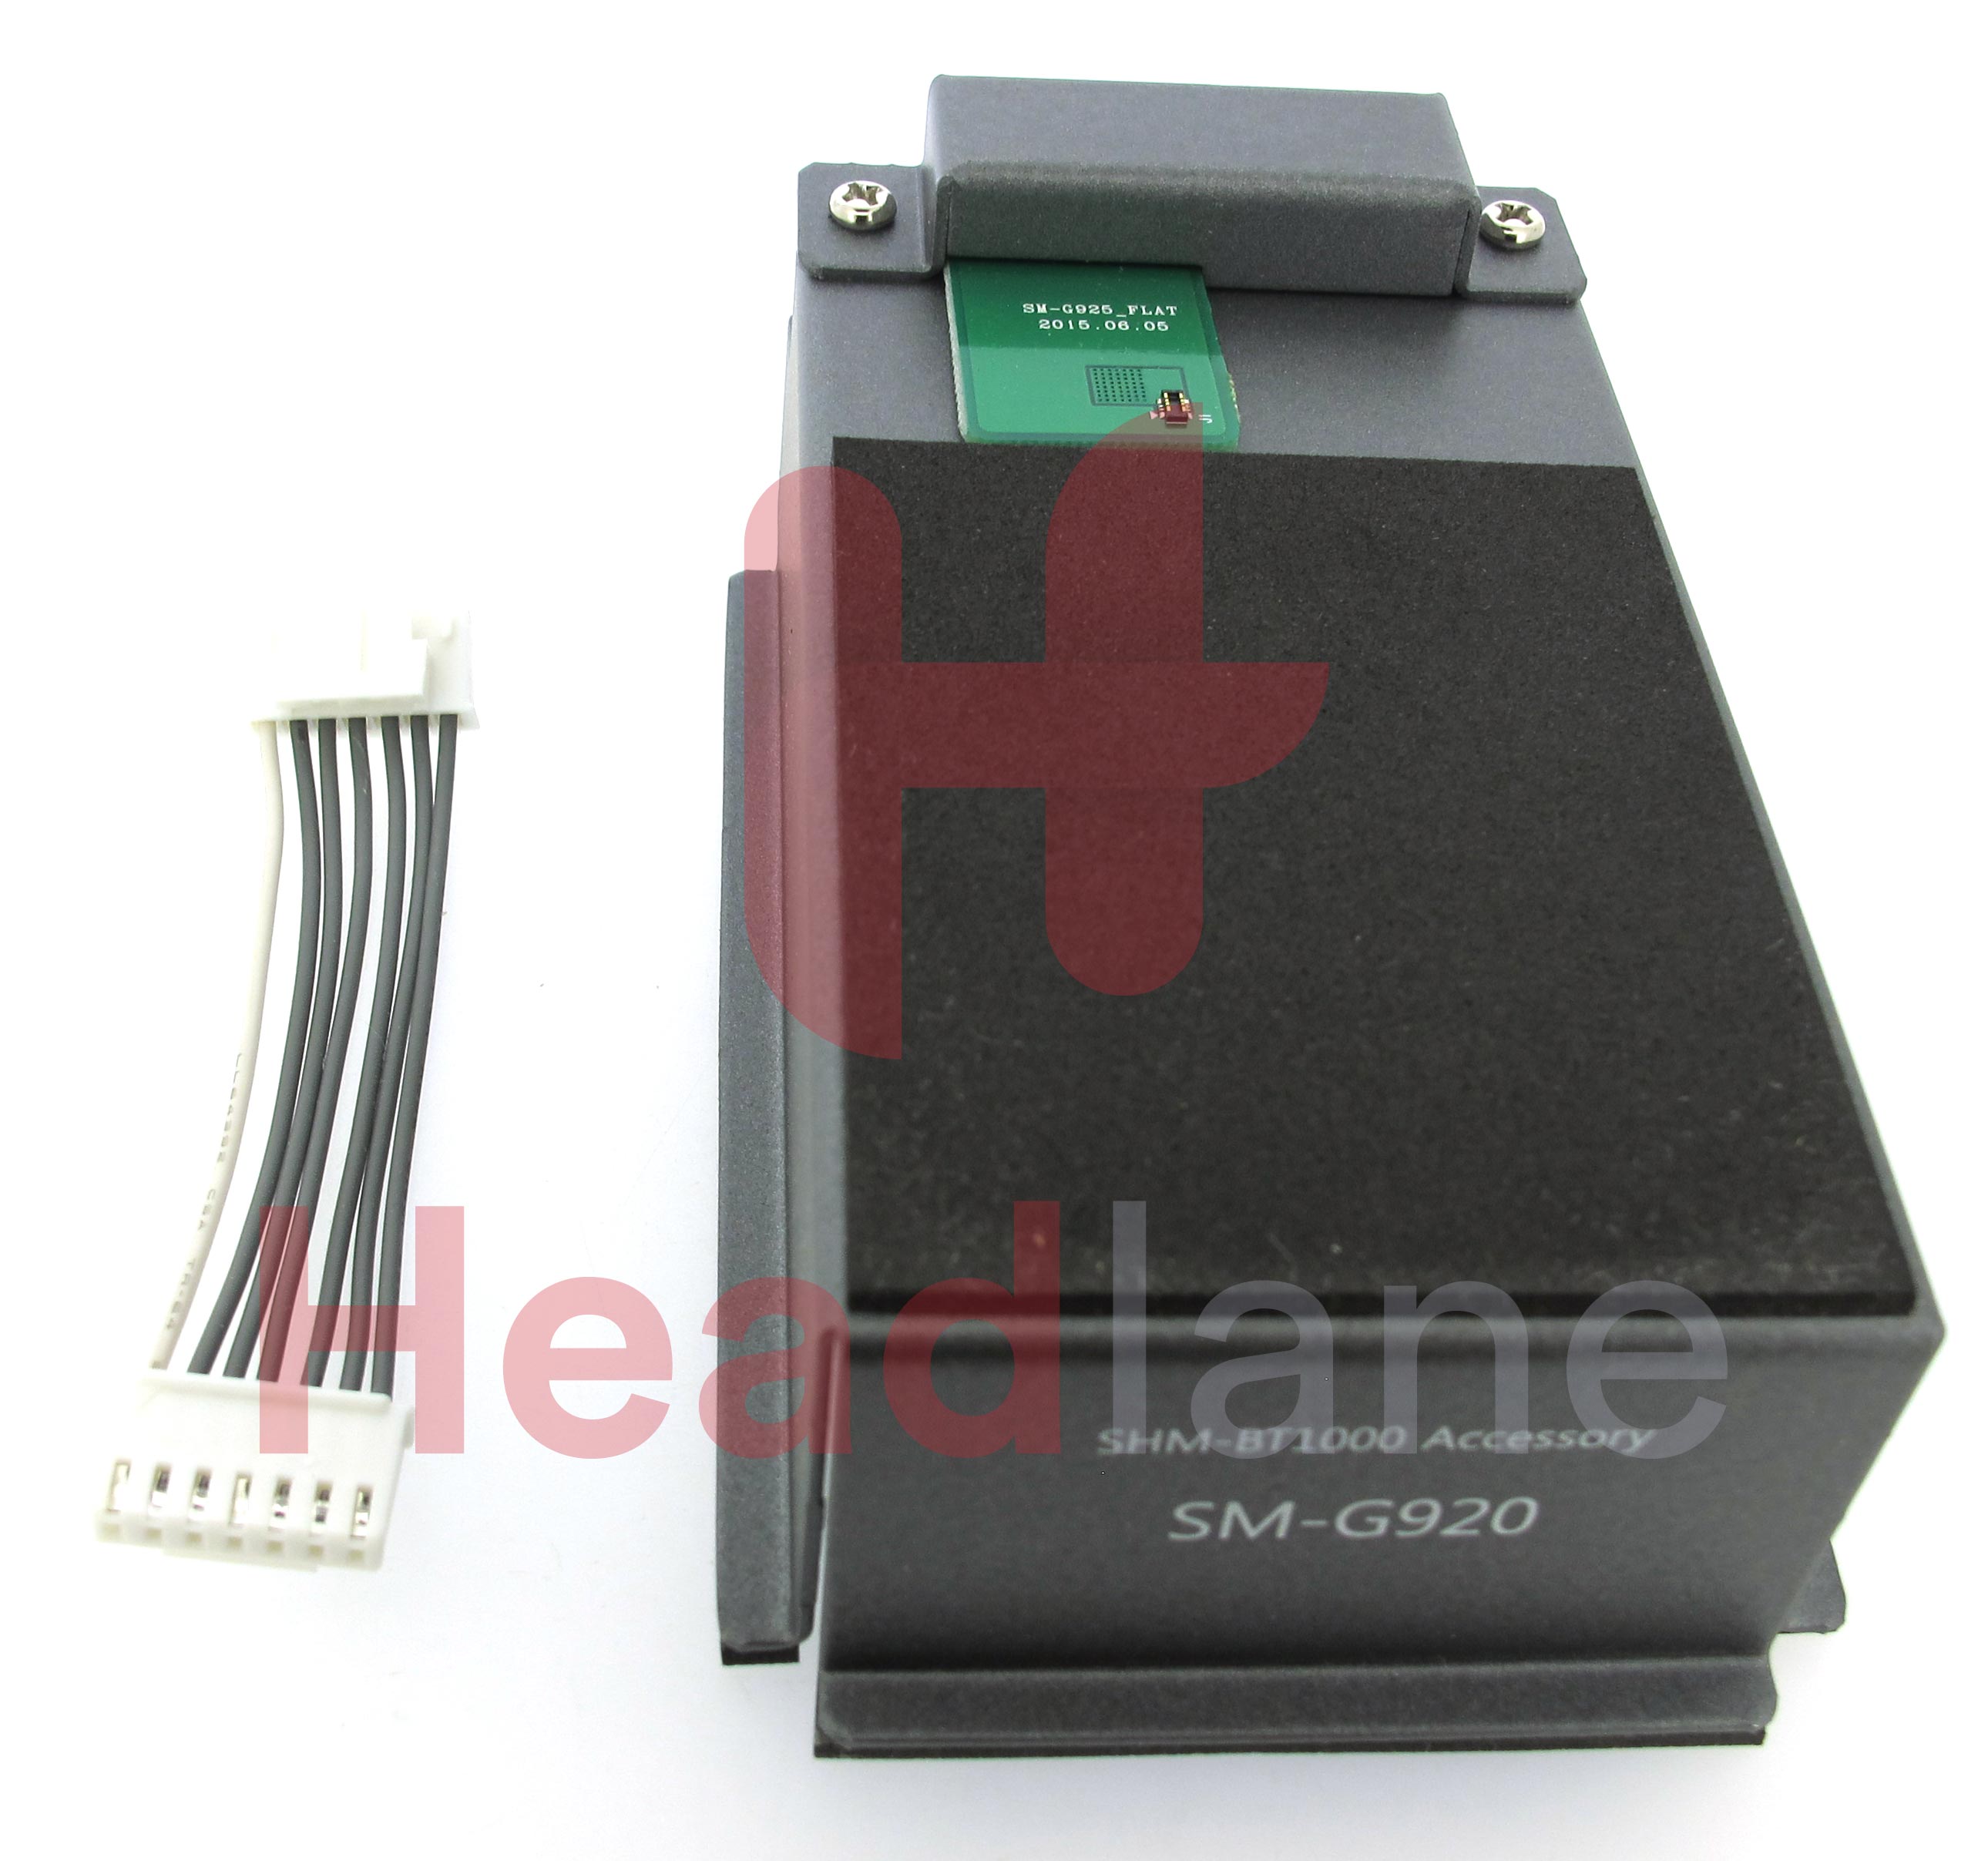 Samsung Battery Tester Attachment for SM-G920